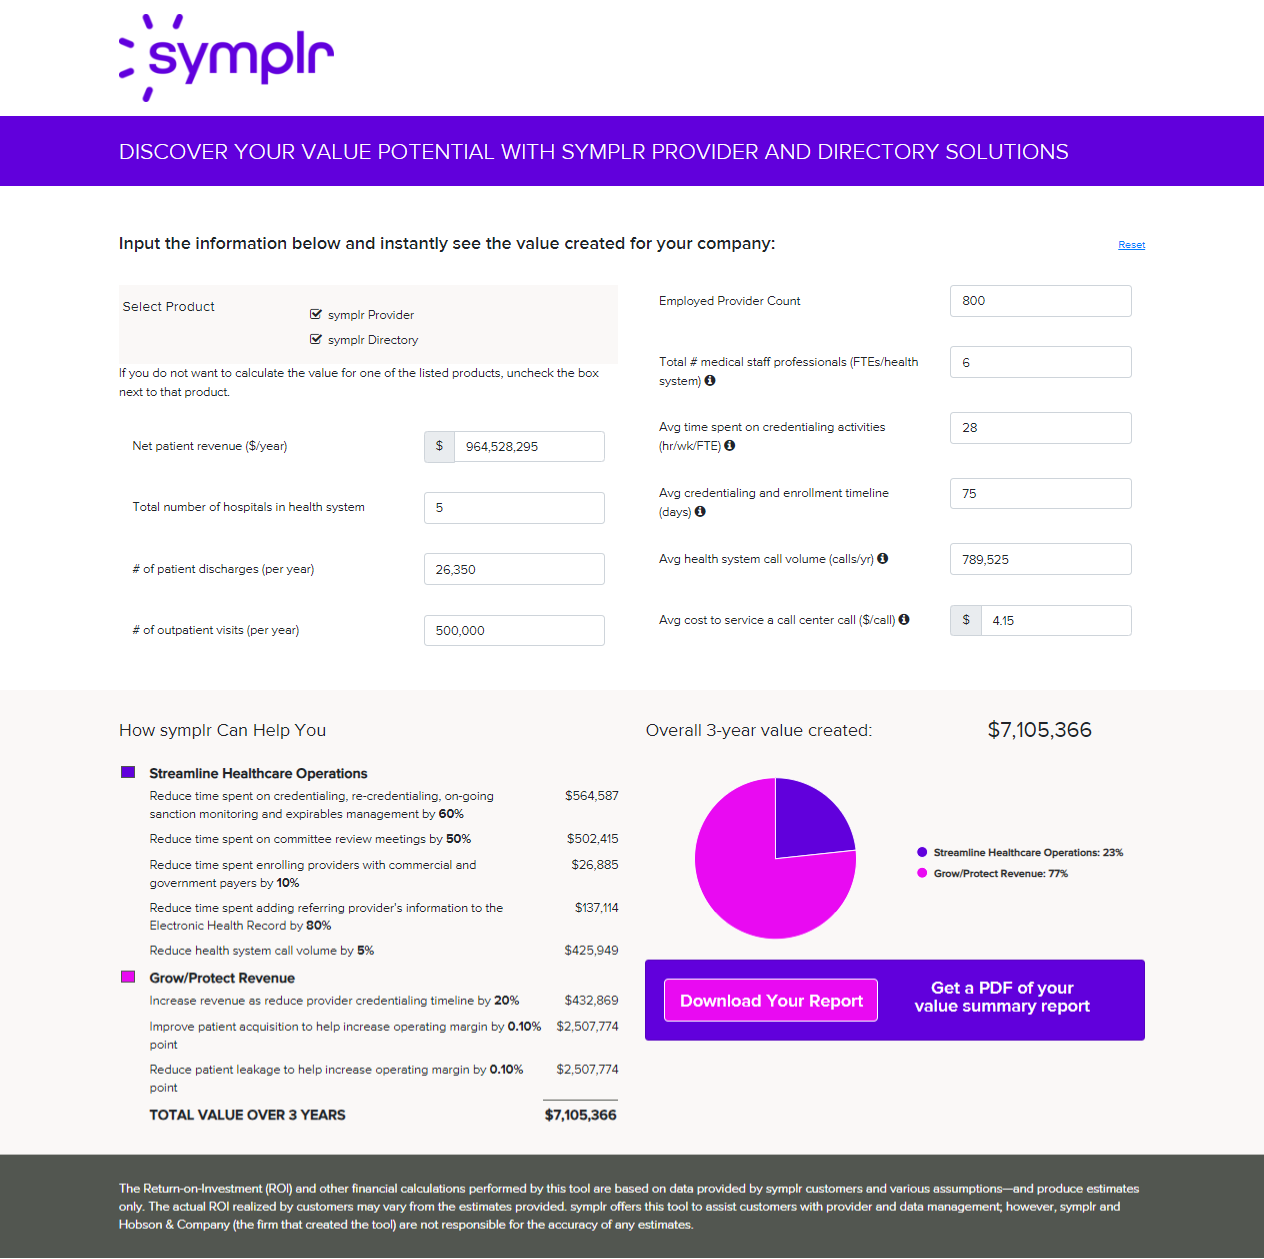 Screenshot of the symplr Provider and symplr Directory Value Calculator